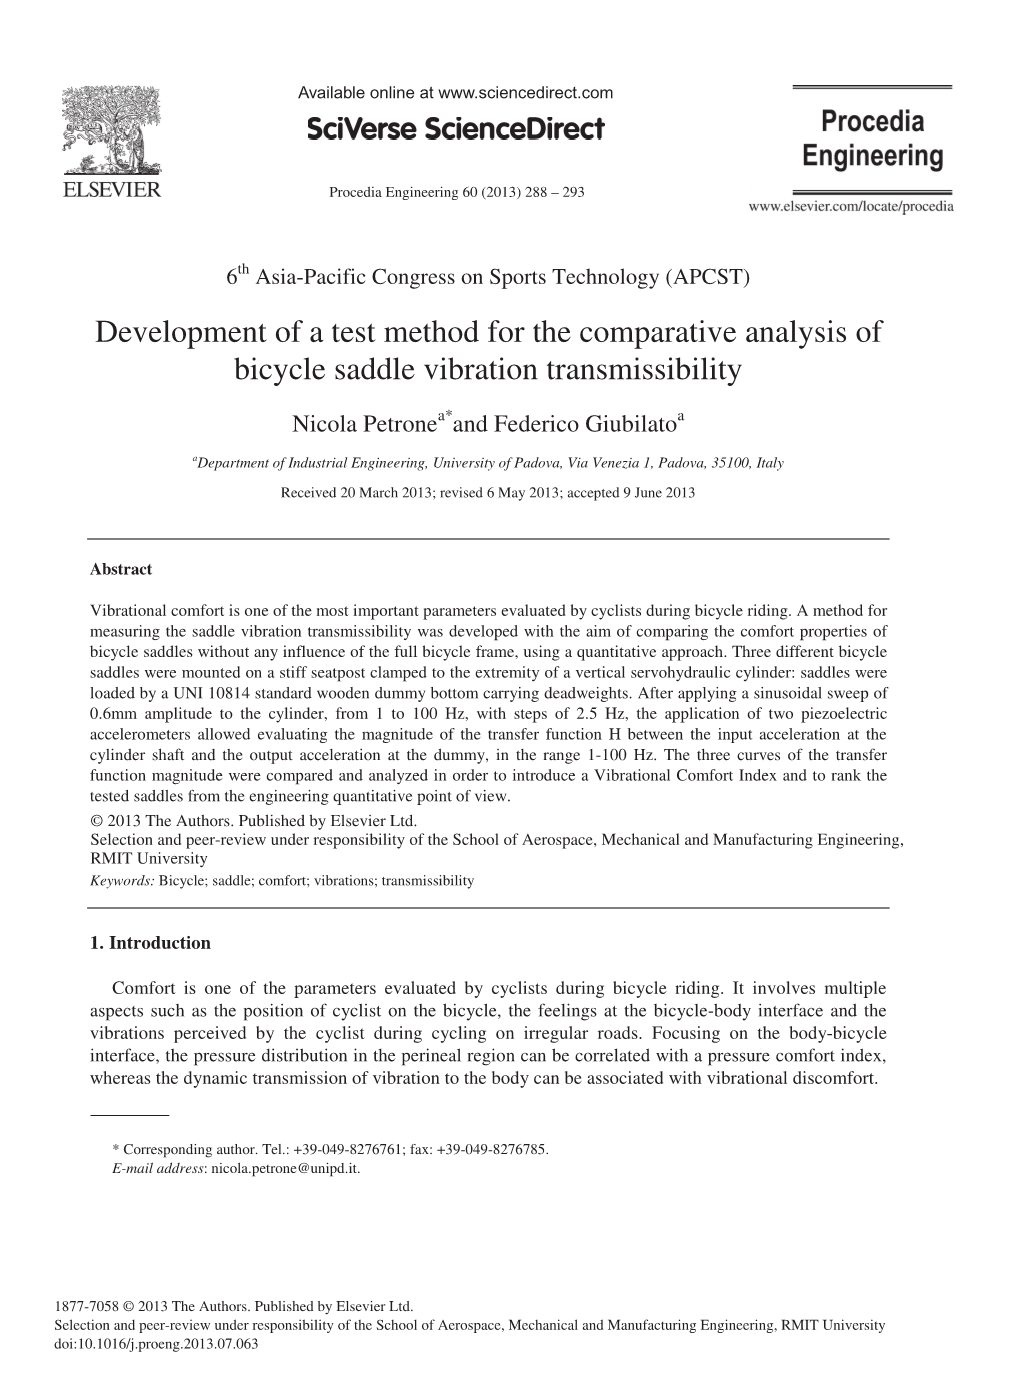 Development of a Test Method for the Comparative Analysis of Bicycle Saddle Vibration Transmissibility